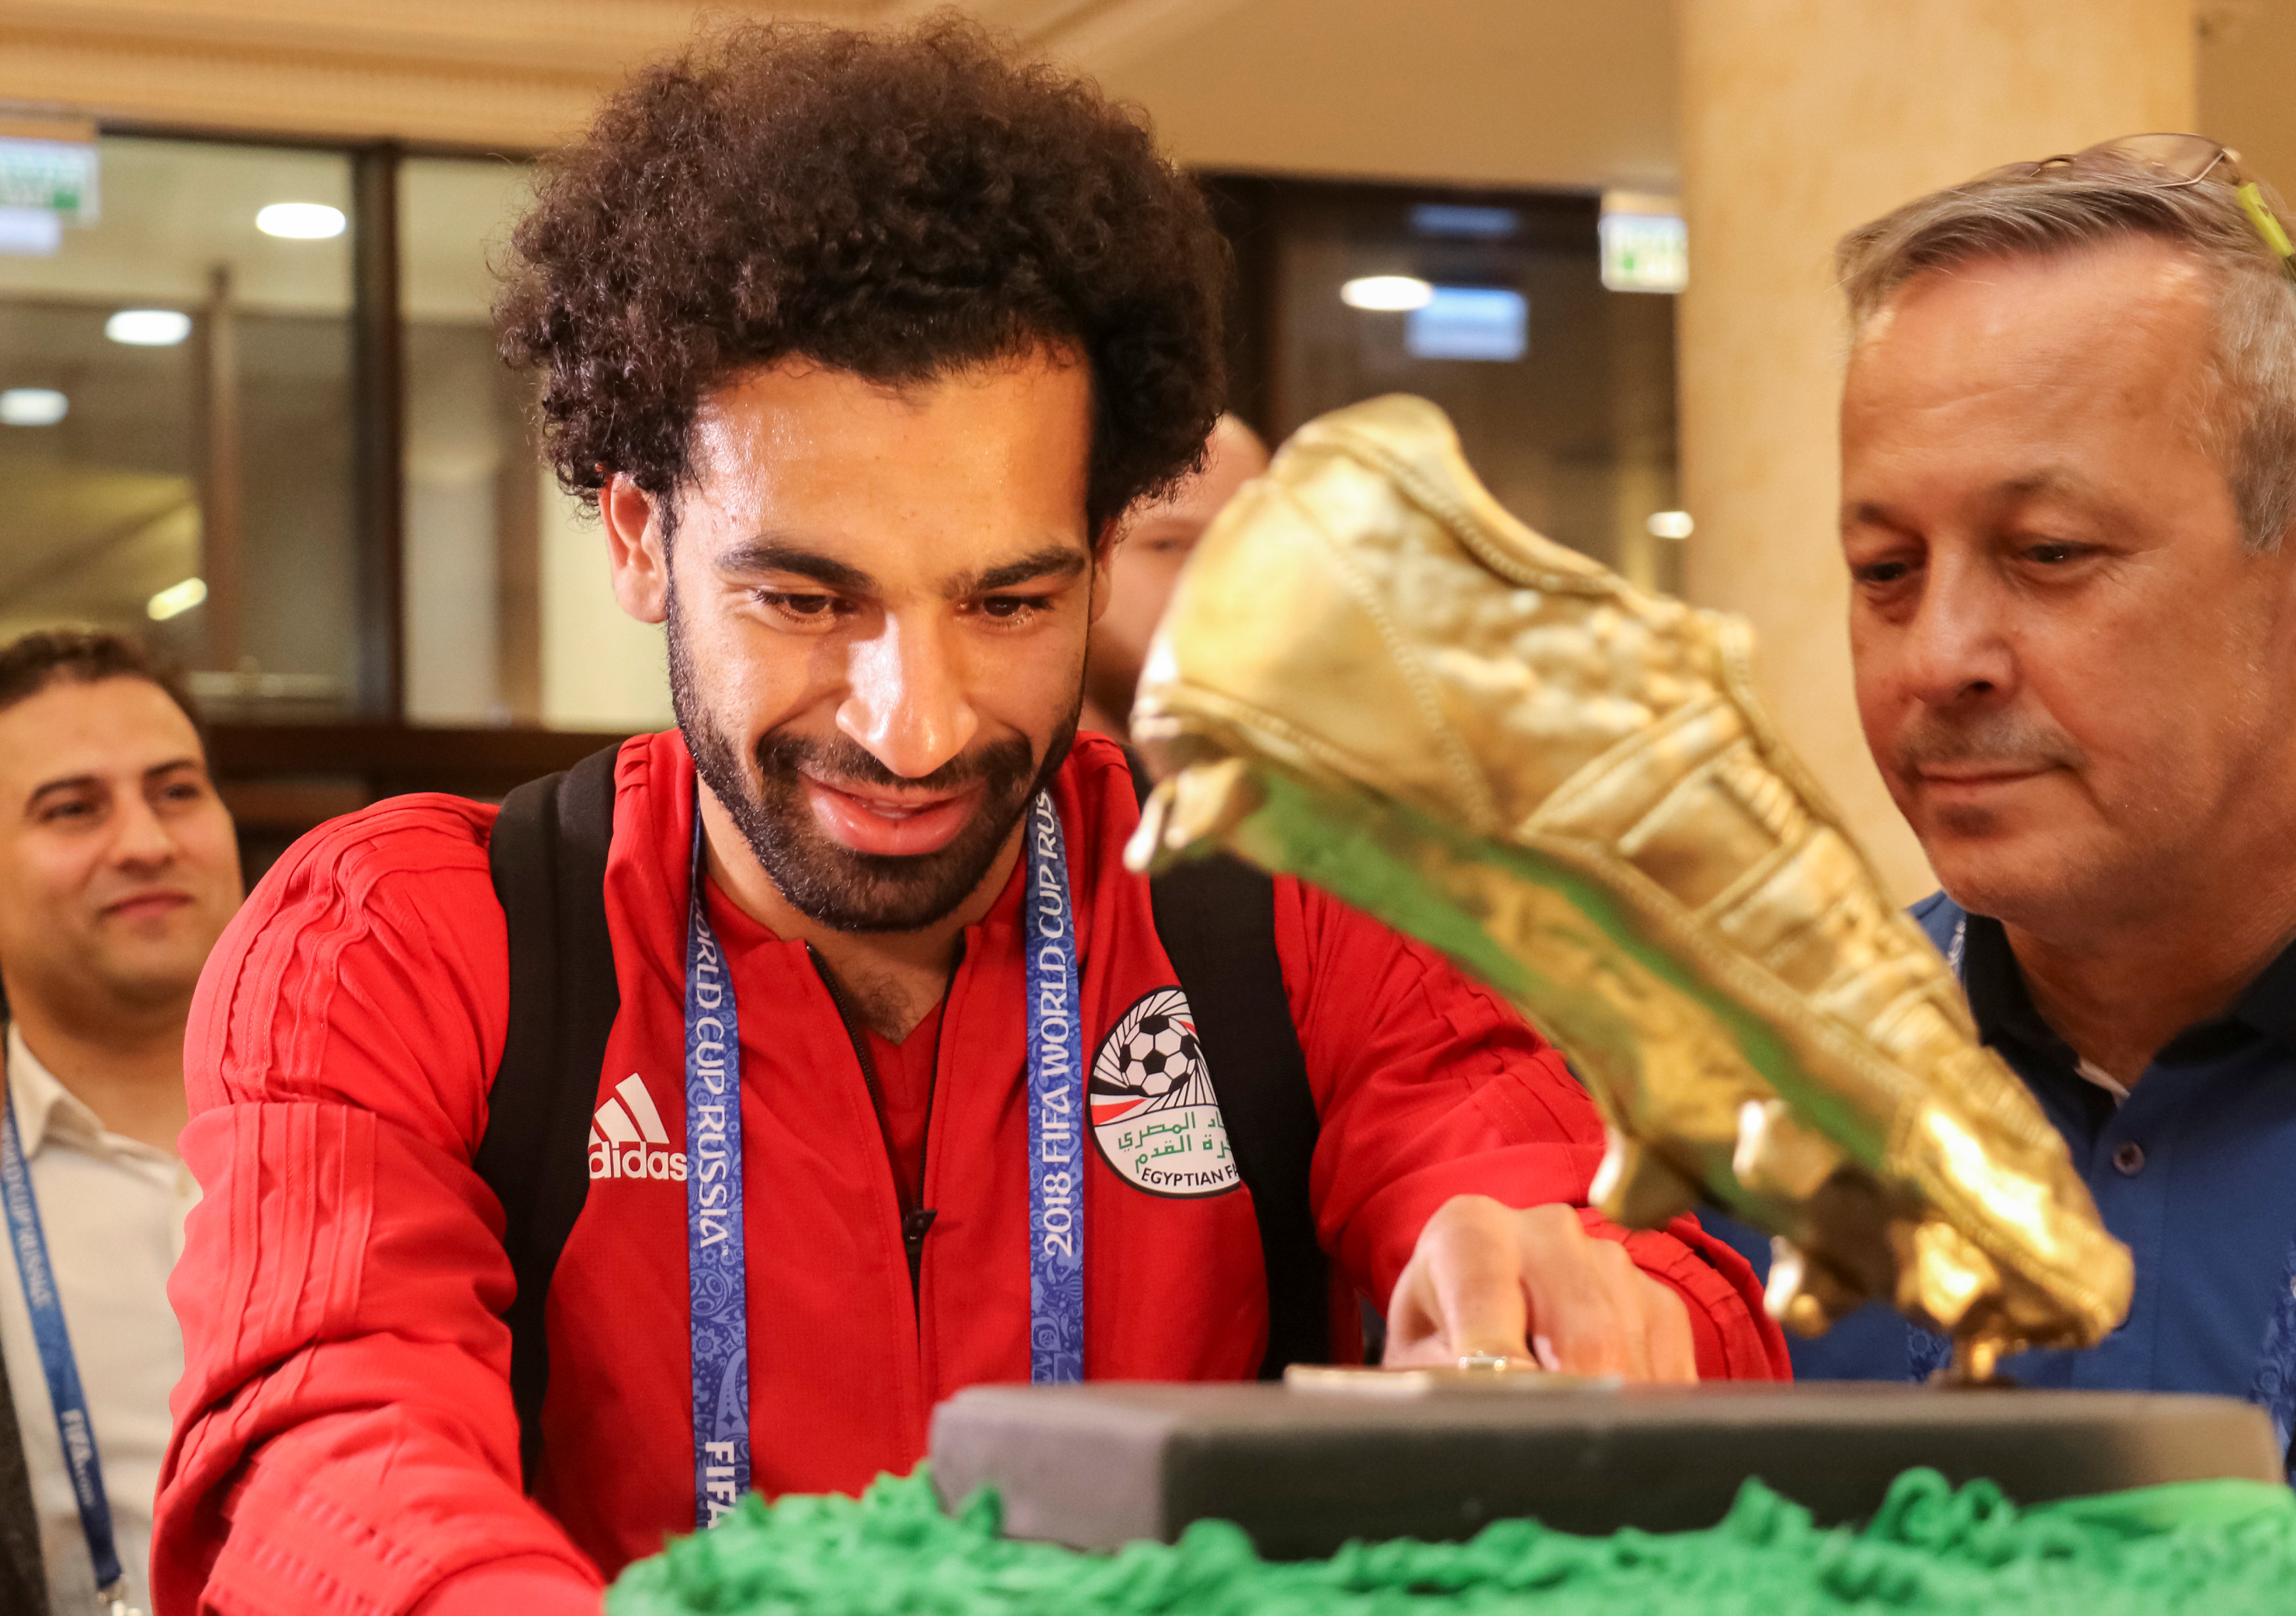 Egypt's Mohamed Salah receives a present on his birthday in Grozny